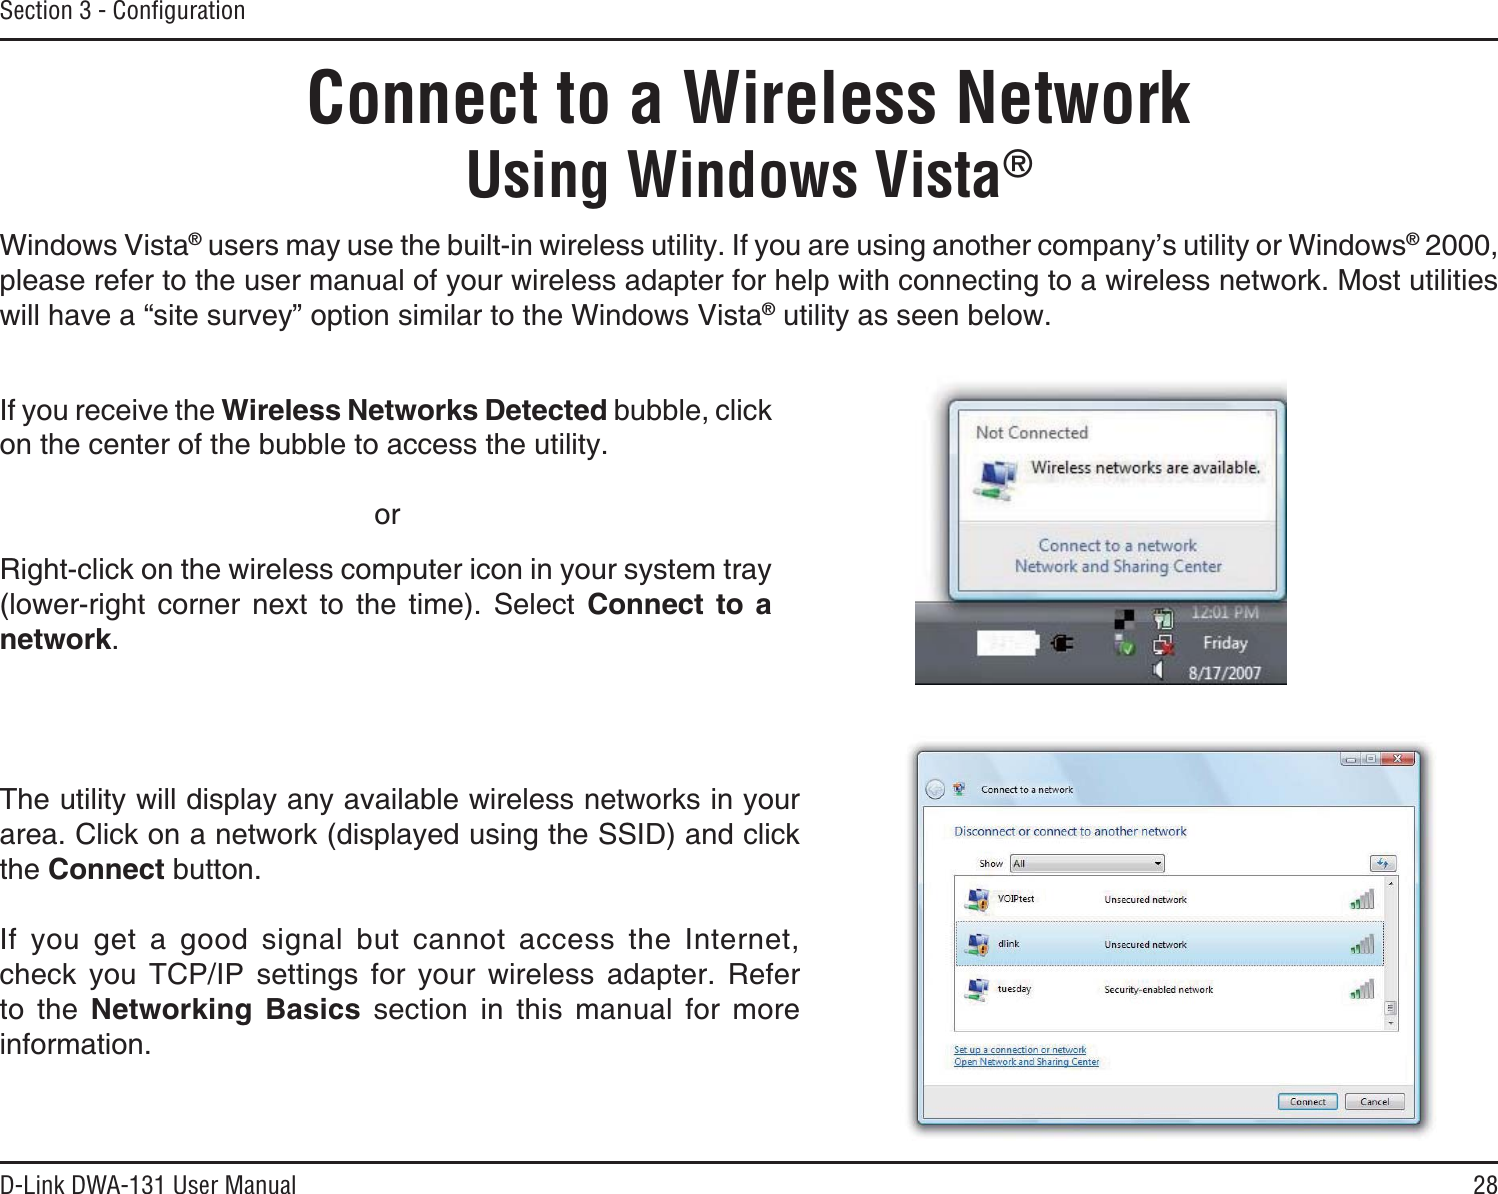 28D-Link DWA-131 User ManualSection 3 - ConﬁgurationConnect to a Wireless NetworkUsing Windows Vista®Windows Vista®WUGTUOC[WUGVJGDWKNVKPYKTGNGUUWVKNKV[+H[QWCTGWUKPICPQVJGTEQORCP[ŏUWVKNKV[QT9KPFQYU® 2000, please refer to the user manual of your wireless adapter for help with connecting to a wireless network. Most utilities will have a “site survey” option similar to the Windows Vista® utility as seen below.Right-click on the wireless computer icon in your system tray (lower-right corner next to the time). Select Connect to a network.If you receive the Wireless Networks Detected bubble, click on the center of the bubble to access the utility.     orThe utility will display any available wireless networks in your area. Click on a network (displayed using the SSID) and click the Connect button.If you get a good signal but cannot access the Internet, EJGEM [QW 6%2+2 UGVVKPIU HQT [QWT YKTGNGUU CFCRVGT 4GHGTto the 0GVYQTMKPI $CUKEU section in this manual for more information.